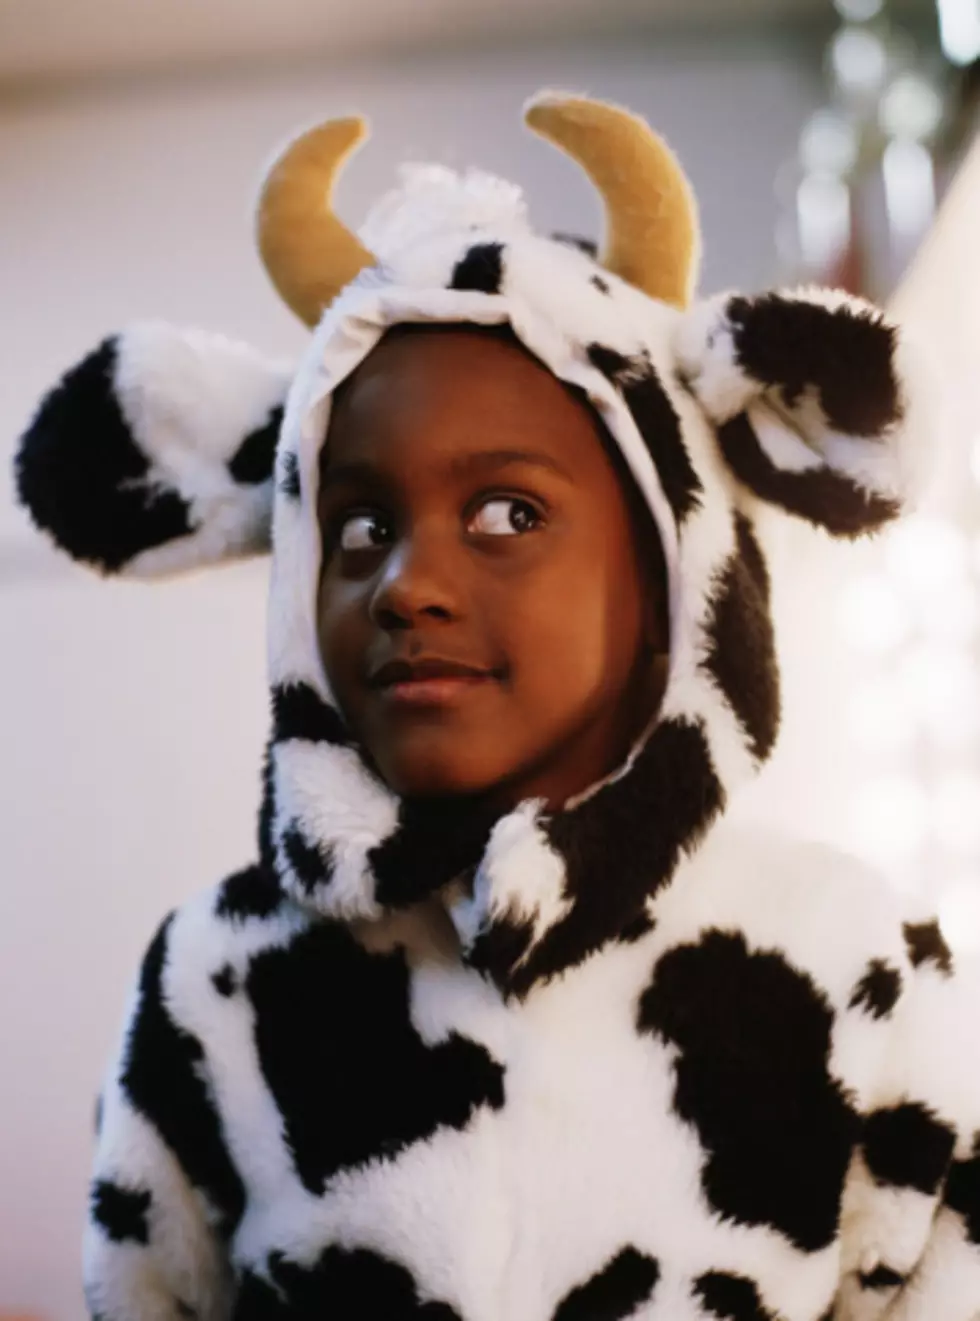 Put On Your Cow Costume, Get Free Food At Chik-fil-A On Tuesday